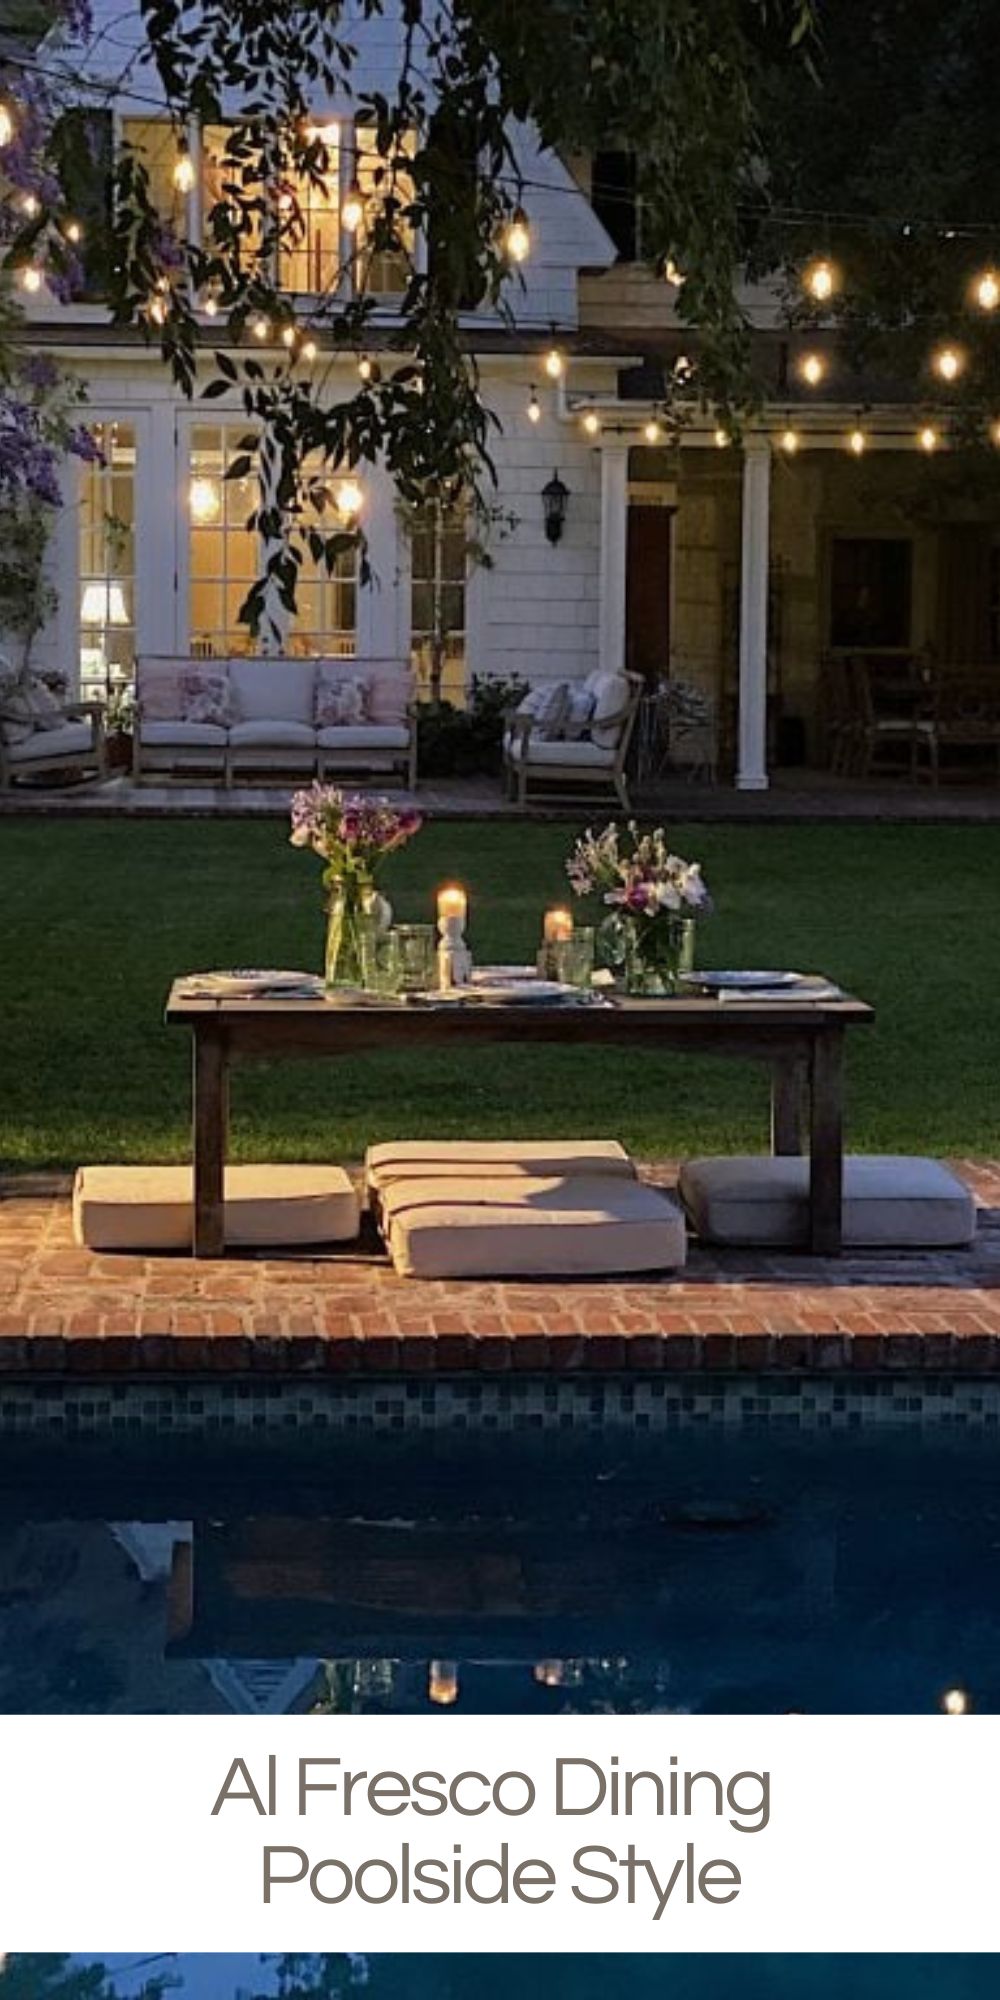 Is anything better than al fresco dining poolside style? I don't think so. I love this casual summer dining idea!